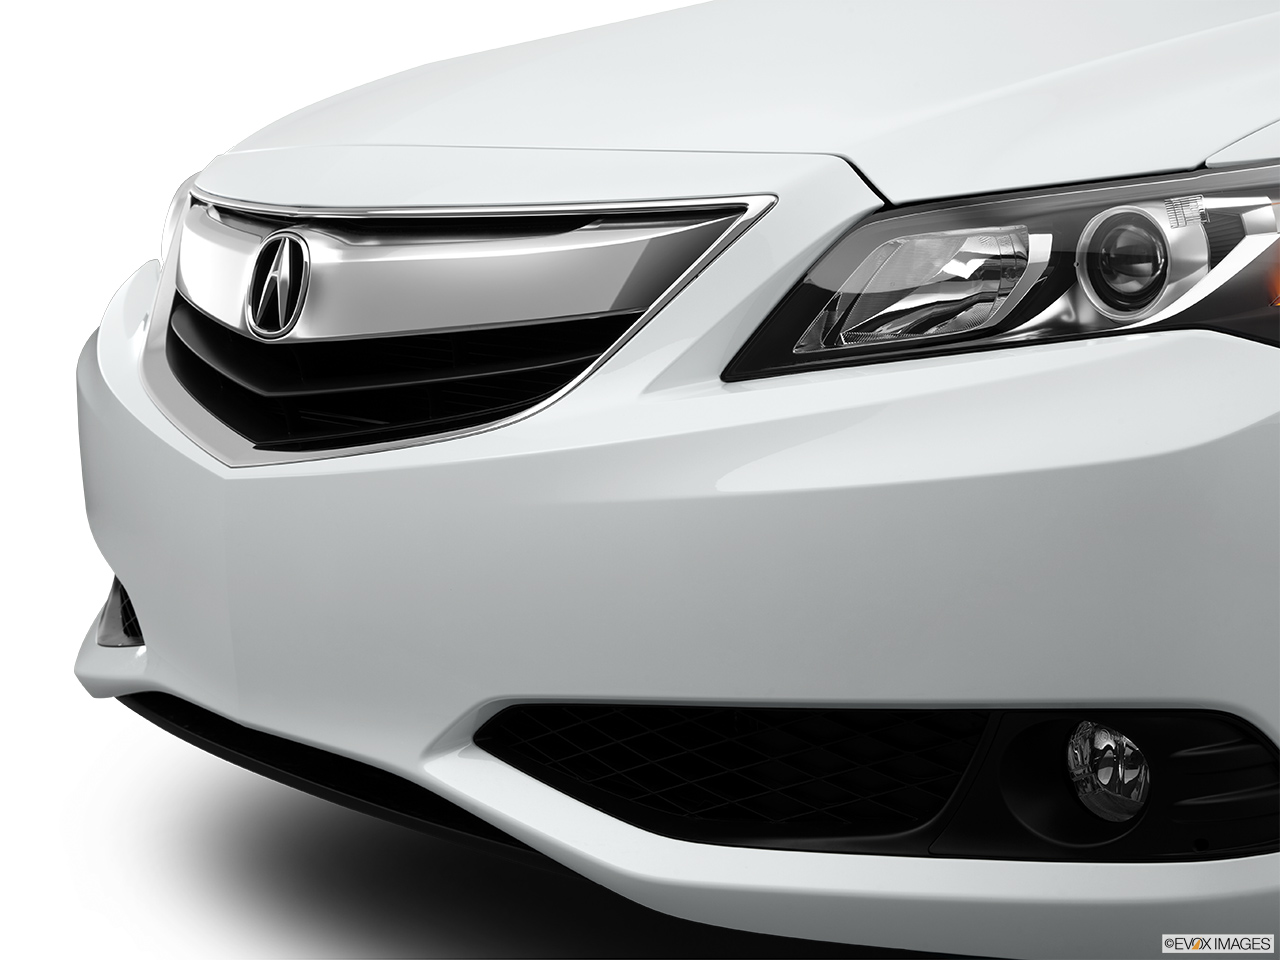 2015 Acura ILX 6-Speed Manual Close up of Grill. 